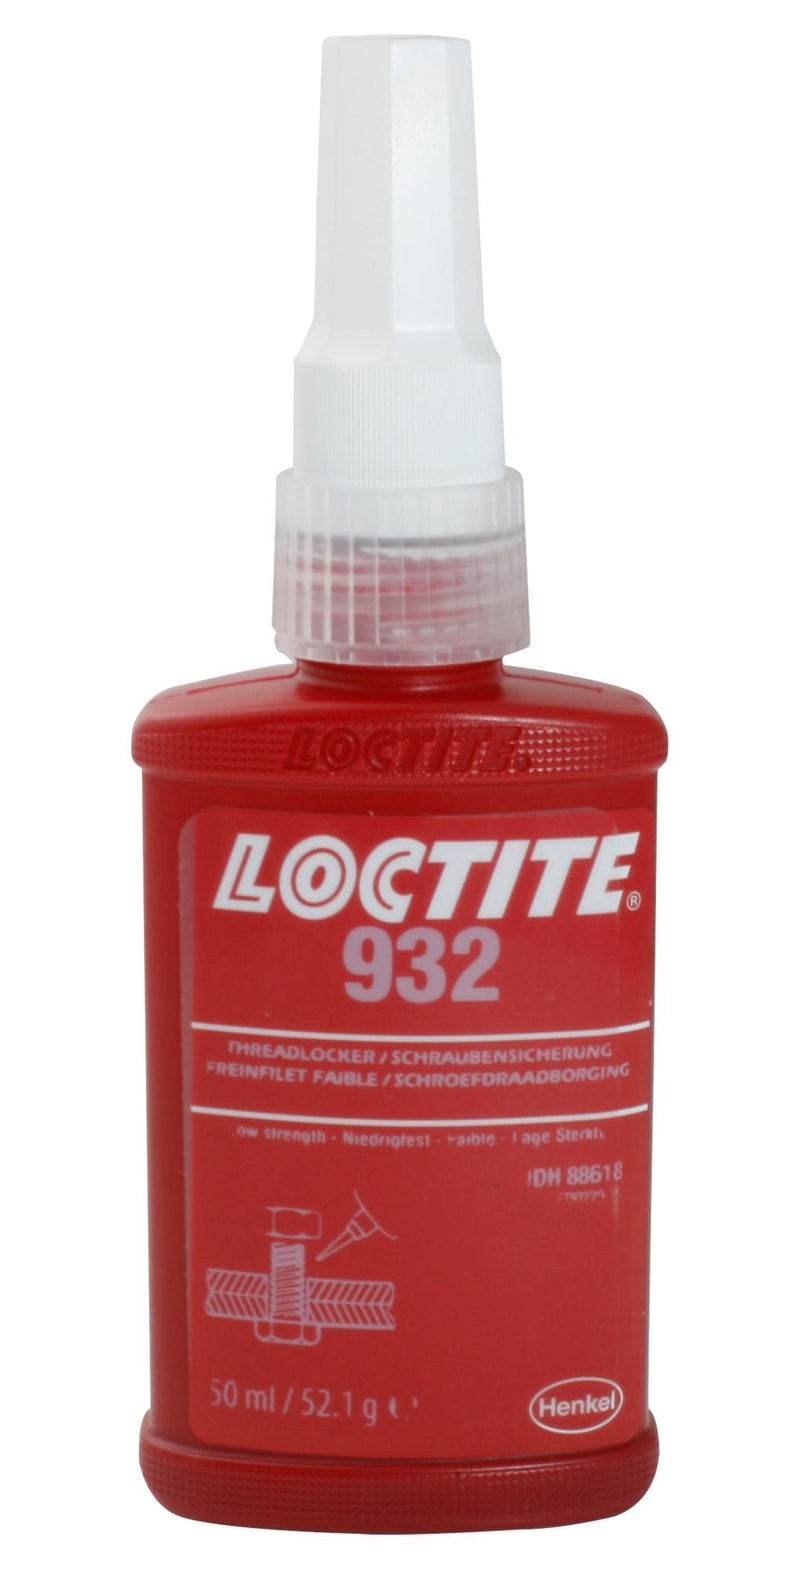 Loctite 932 50ML Adhesive Acrylic Low Strength Viscosity Brown Bottle 50 ml